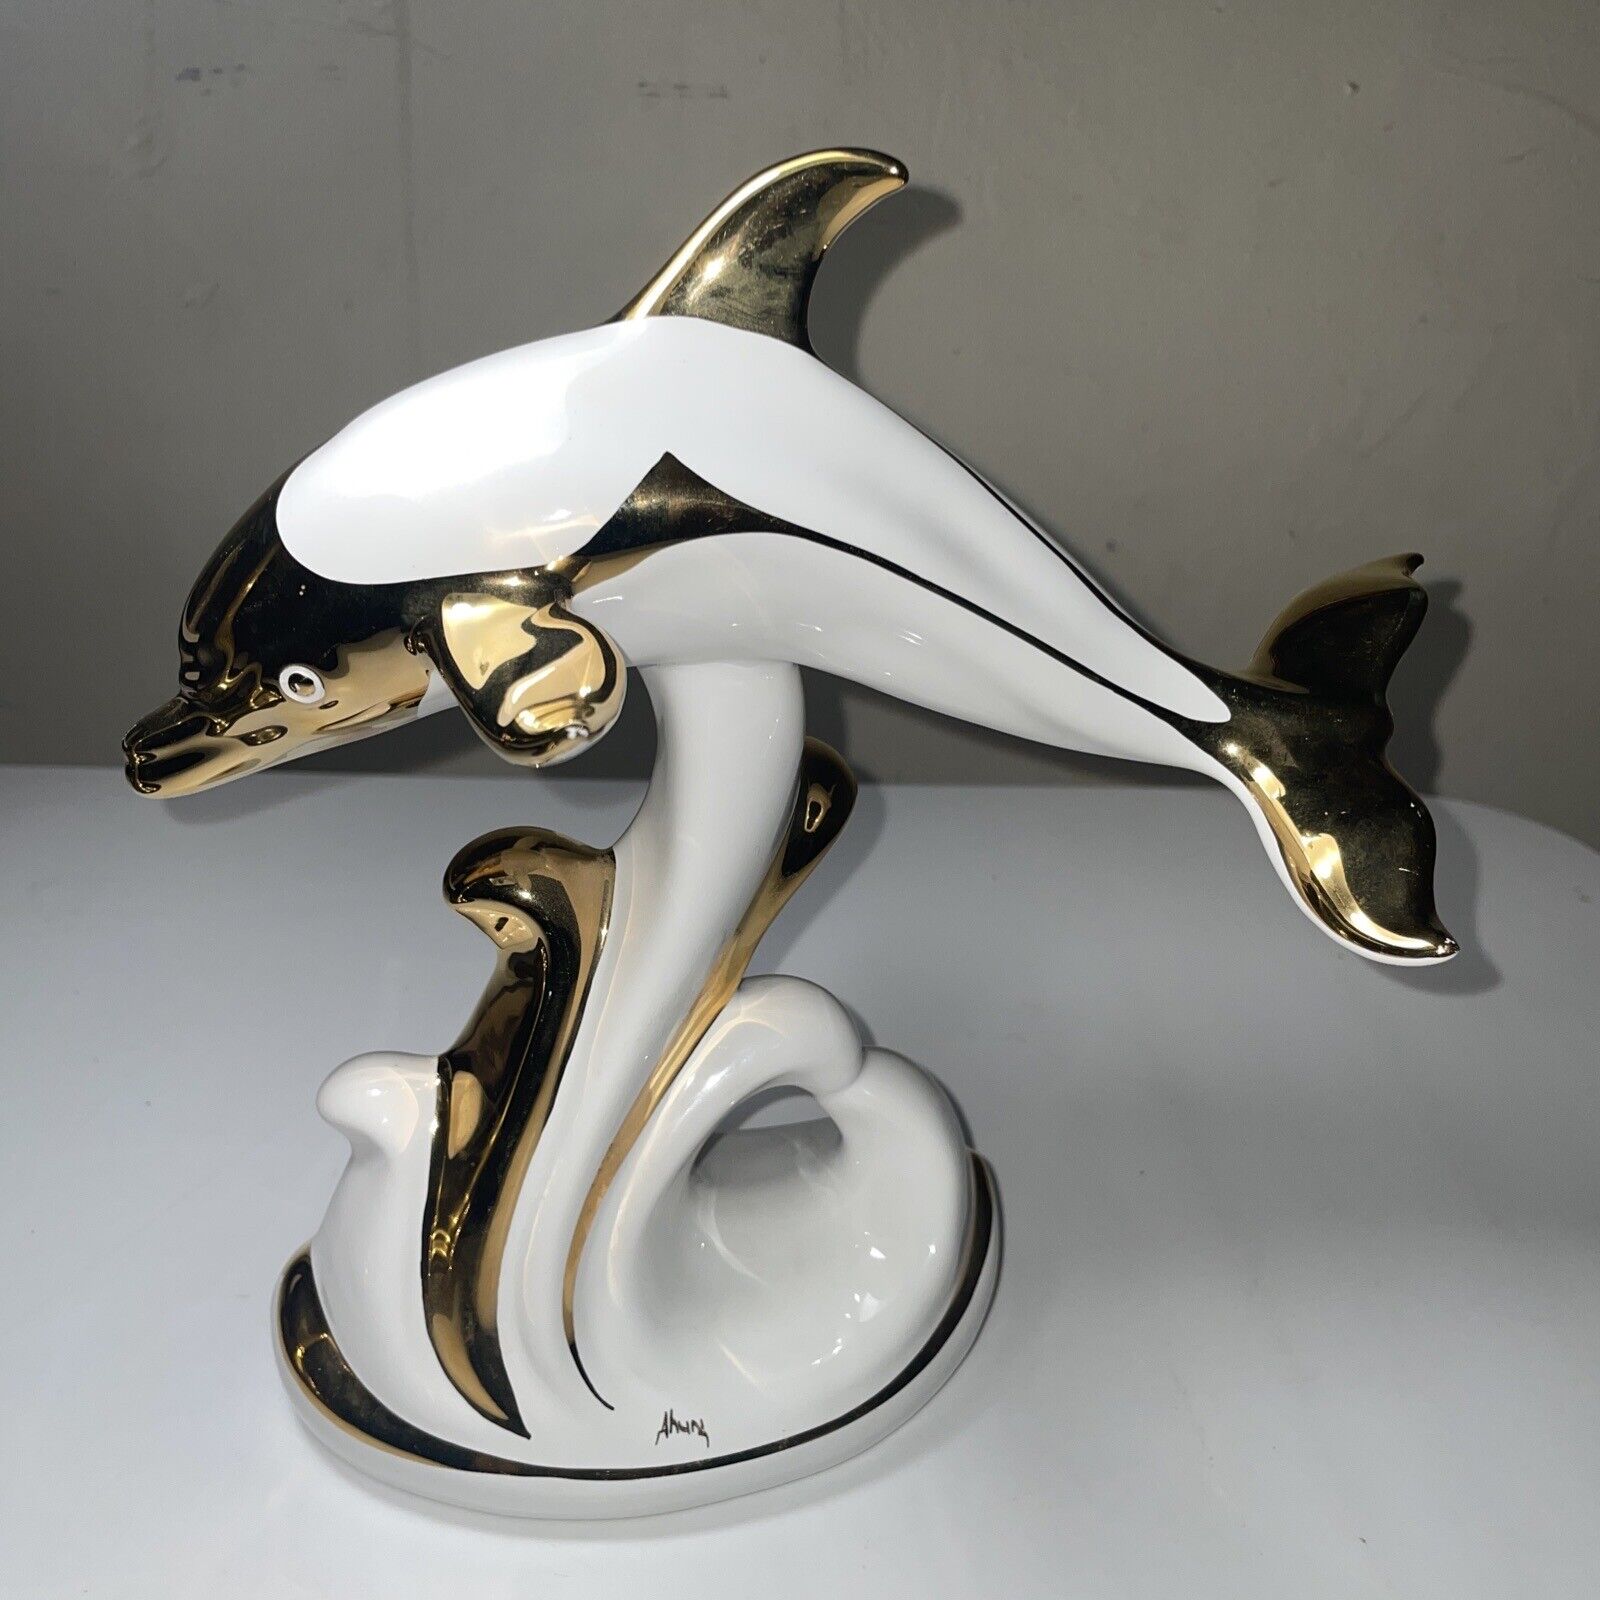 Vintage 24k Art Deco Dolphin Signed Ahunz? Made In Italy. 9x8” Beautiful Piece